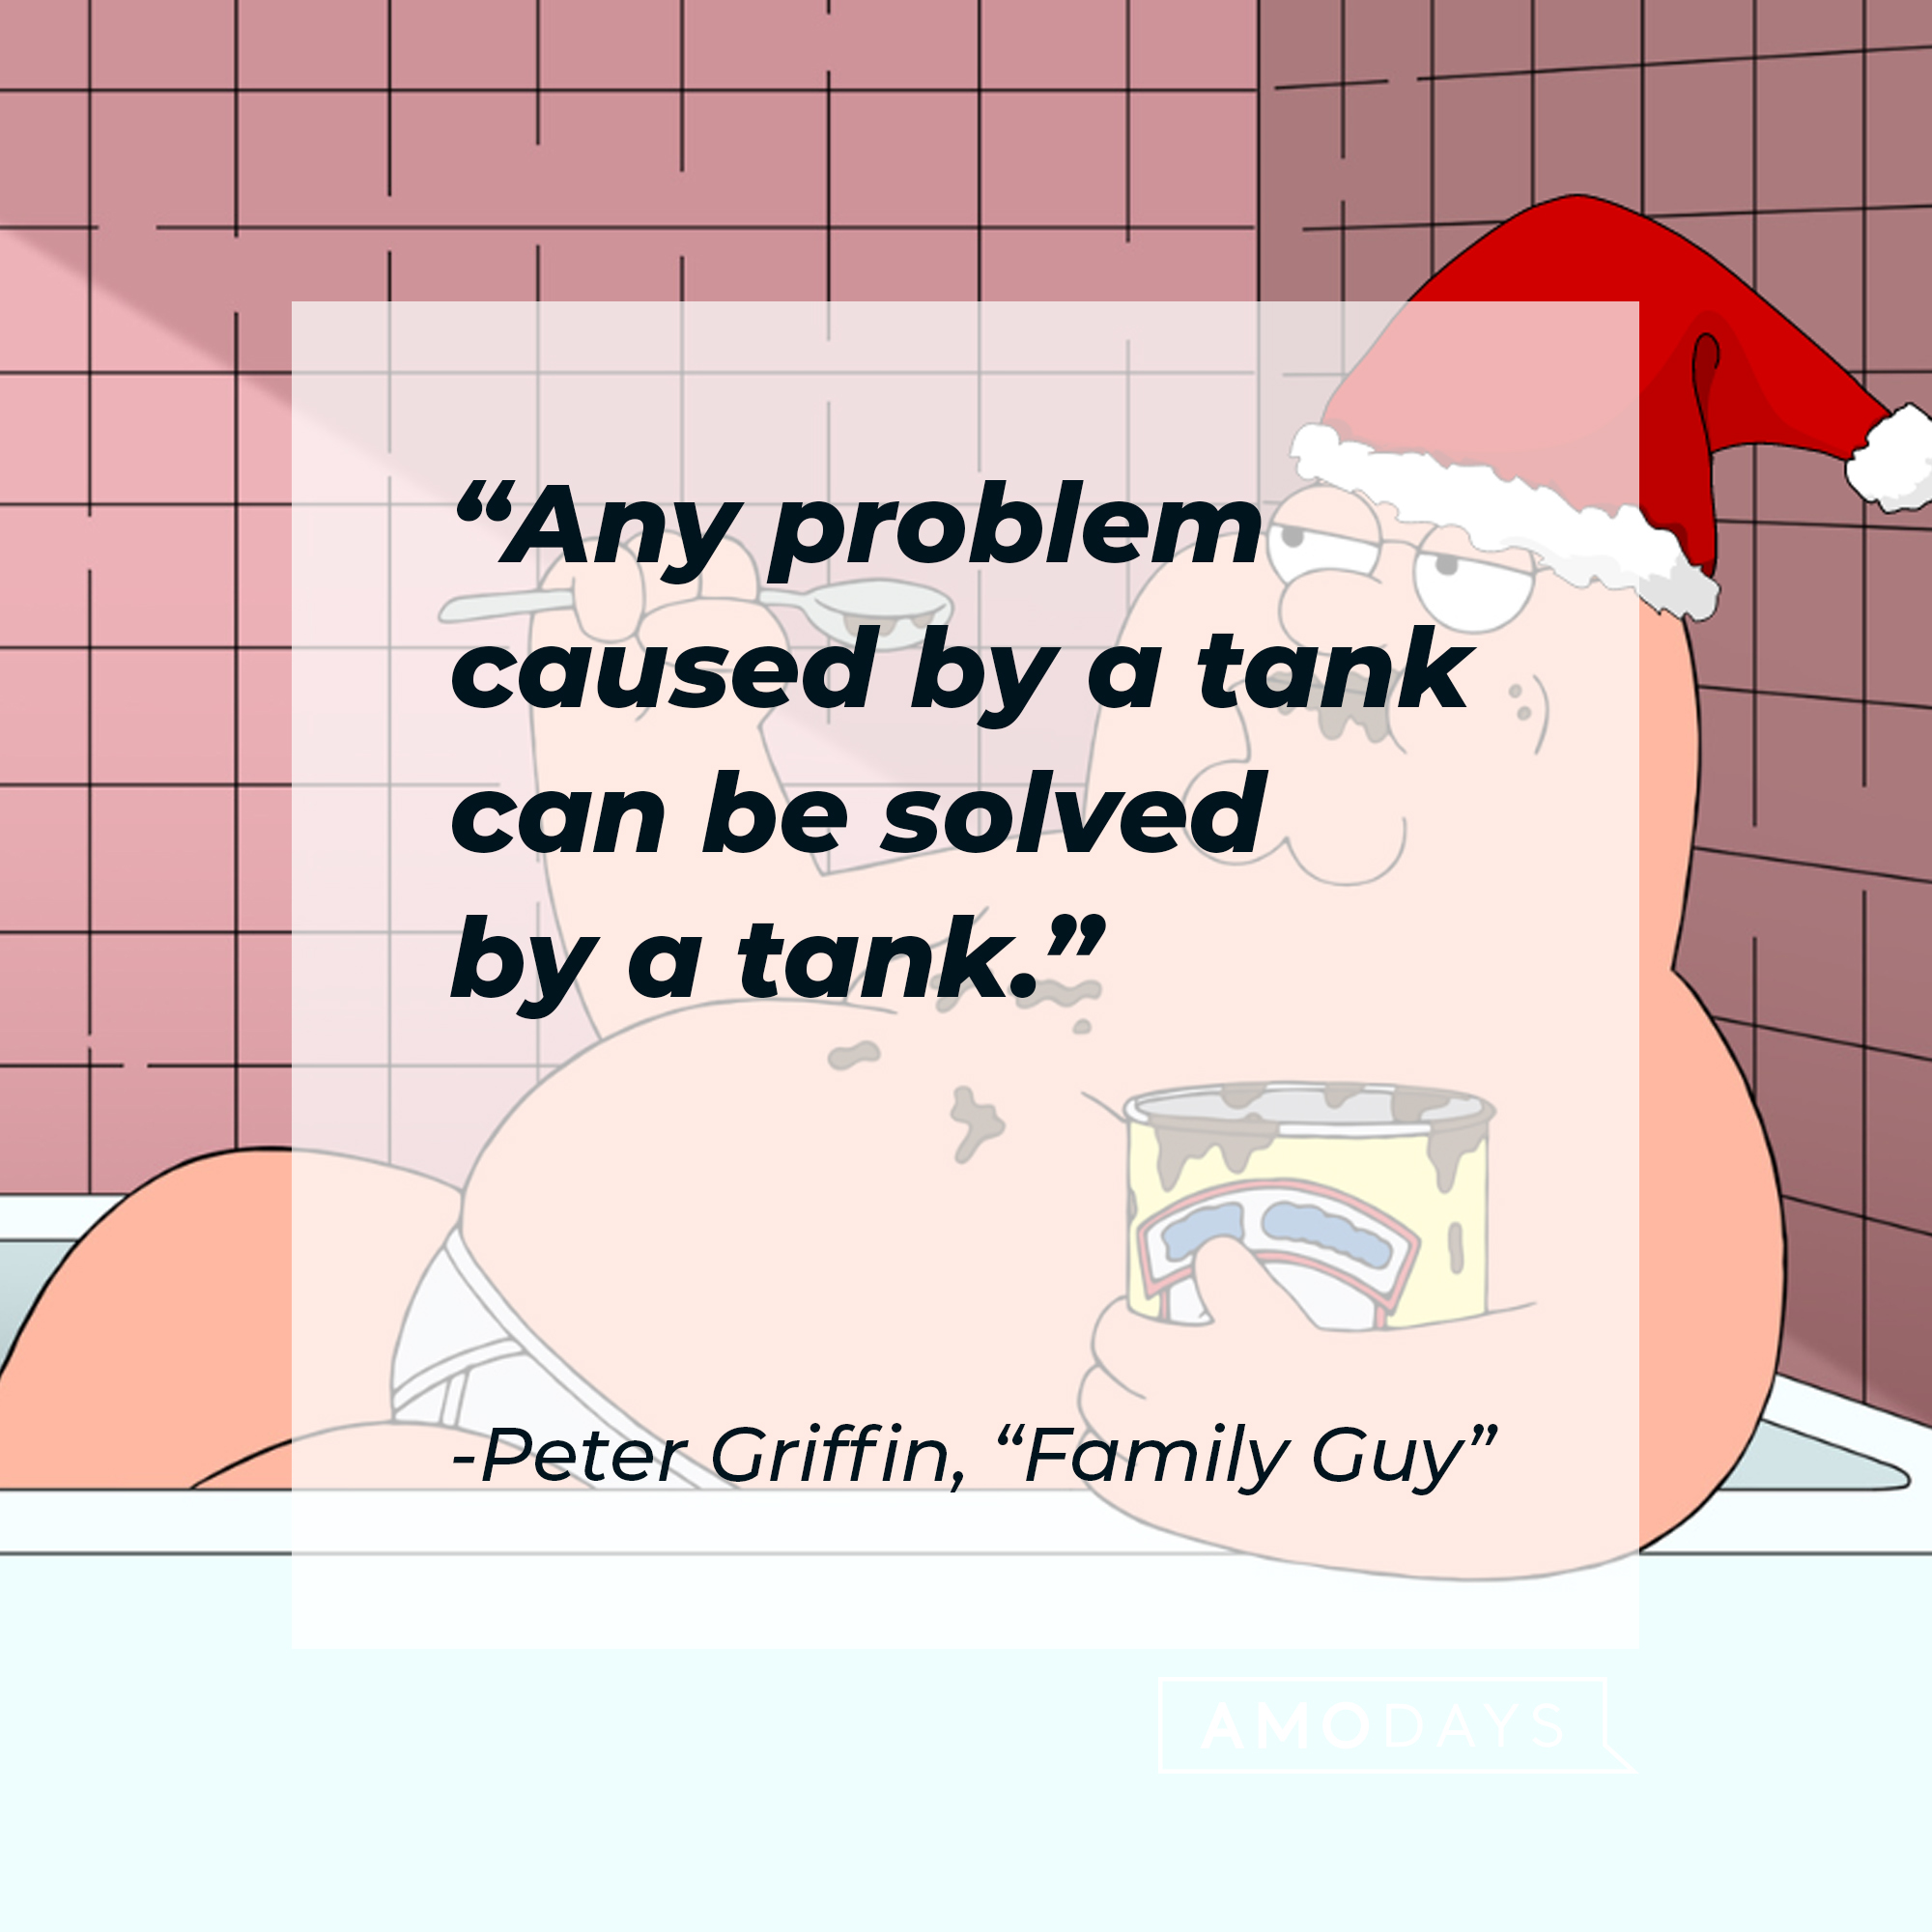 Peter Griffin's quote: "Any problem caused by a tank can be solved by a tank." | Source: facebook.com/FamilyGuy